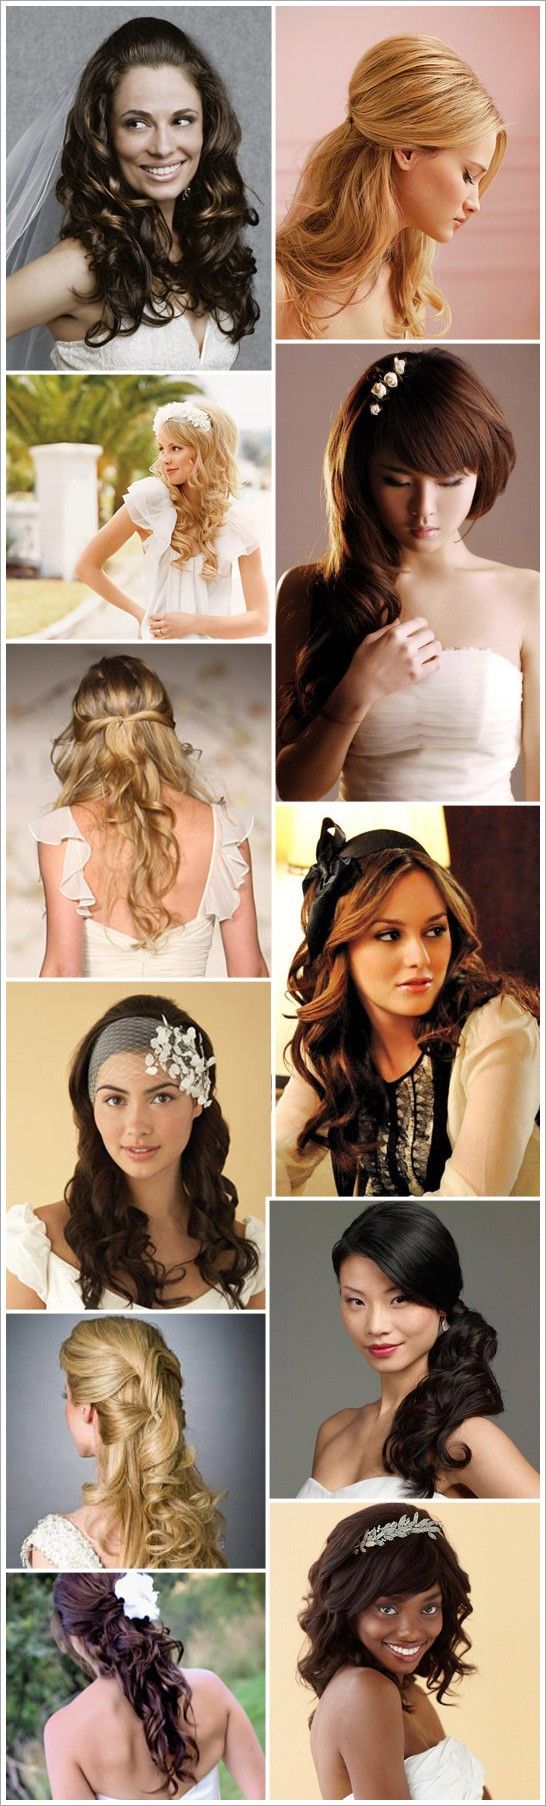 Love these hair do’s for a wedding!